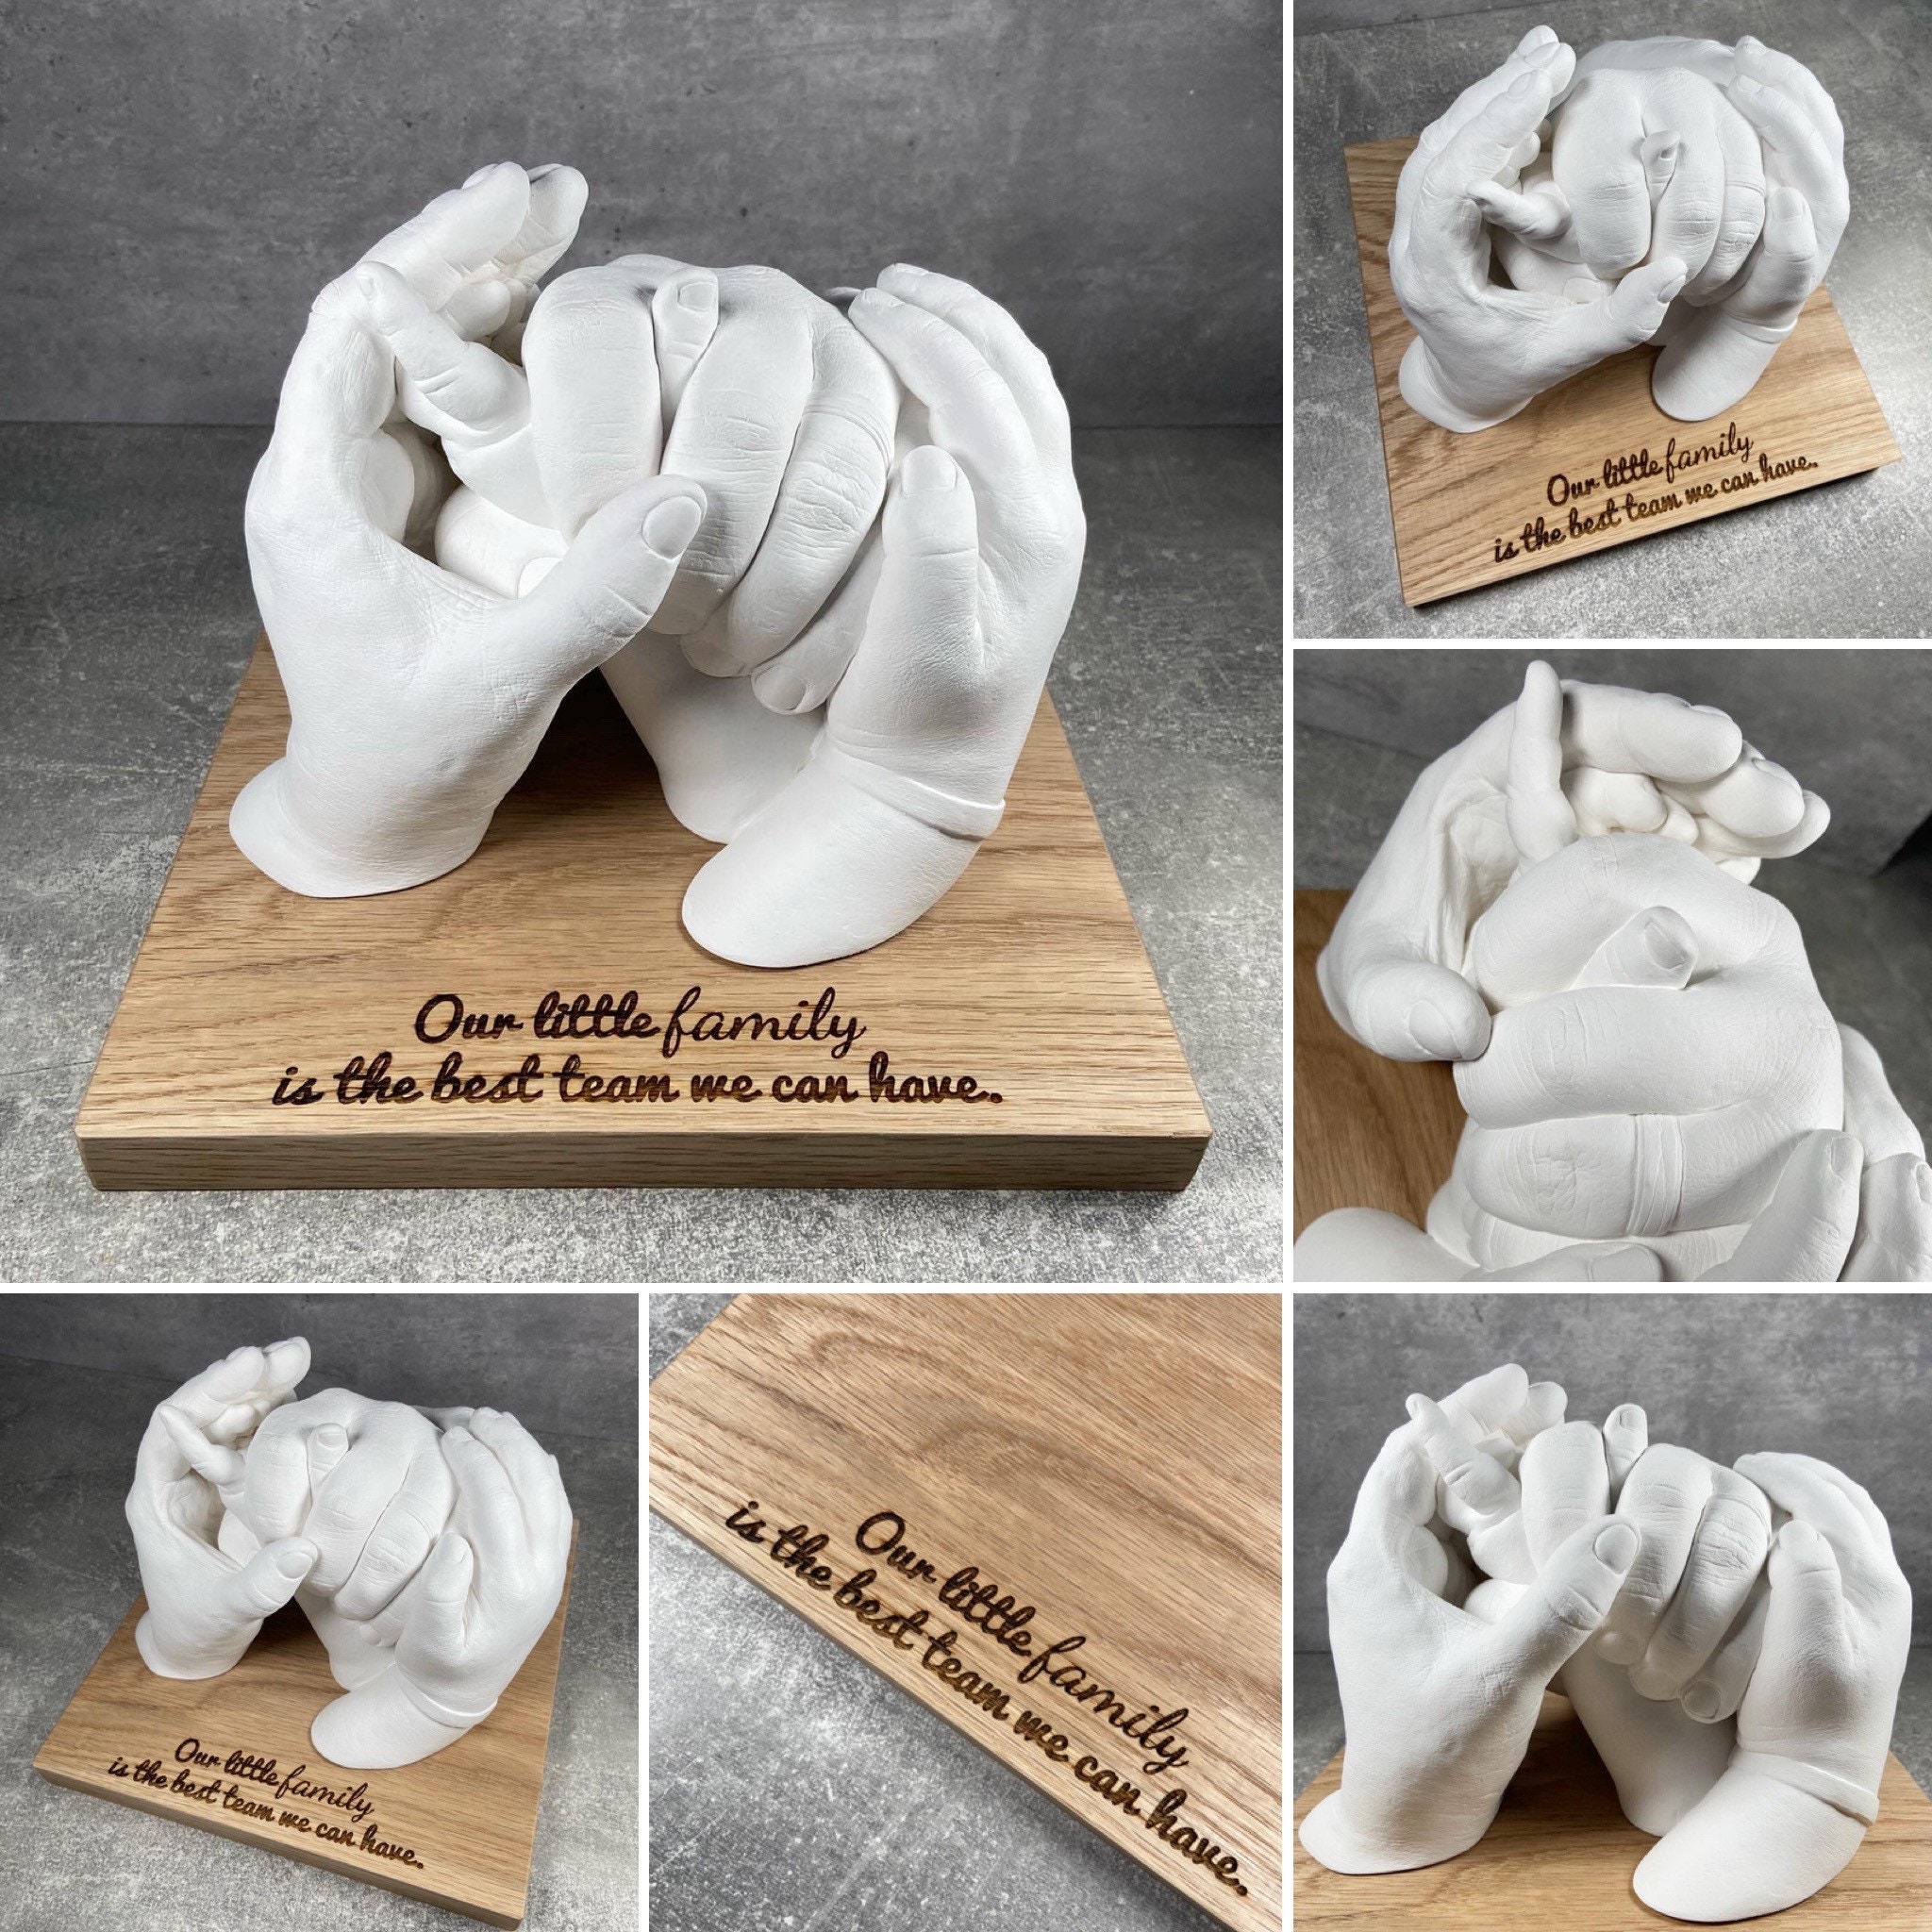 Smaphy Hands Casting Kit, DIY Hand molding Kit. Hand Holding Craft for  Couples, Adult & Child, Family, Friends. Anniversary, Wedding & Couples  Gifts.